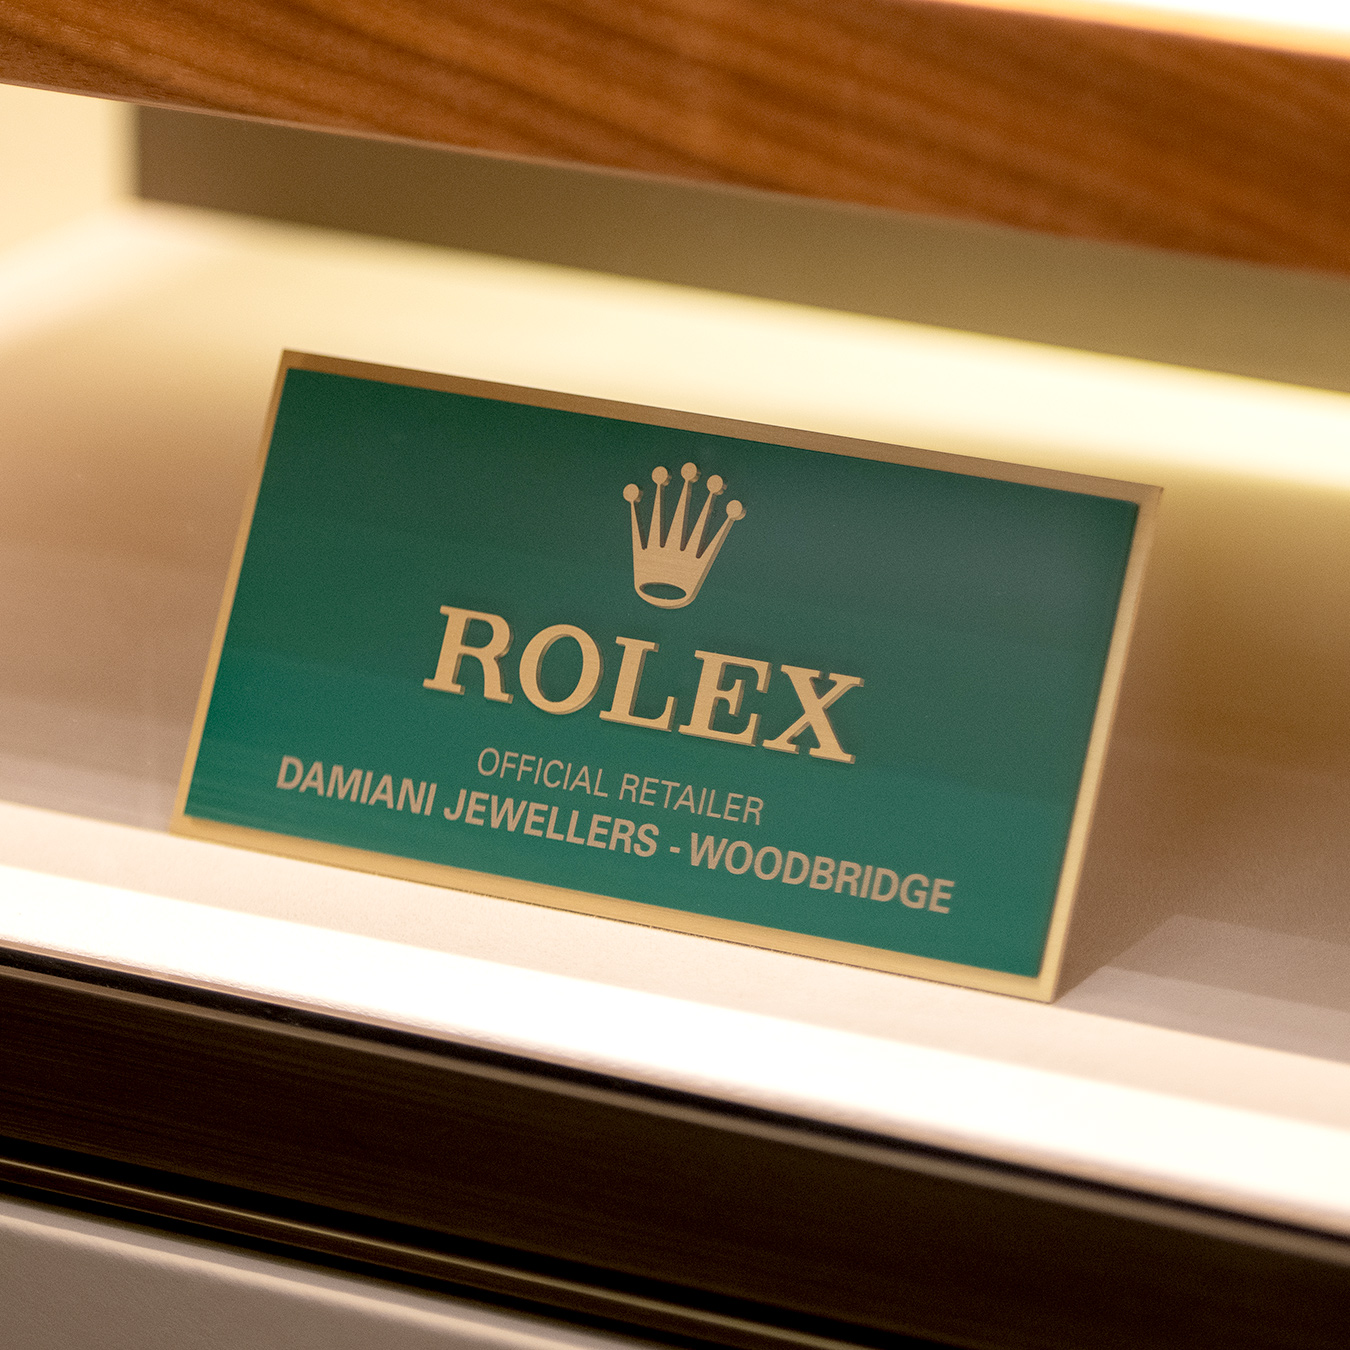 Rolex Section at Damiani Jewellers